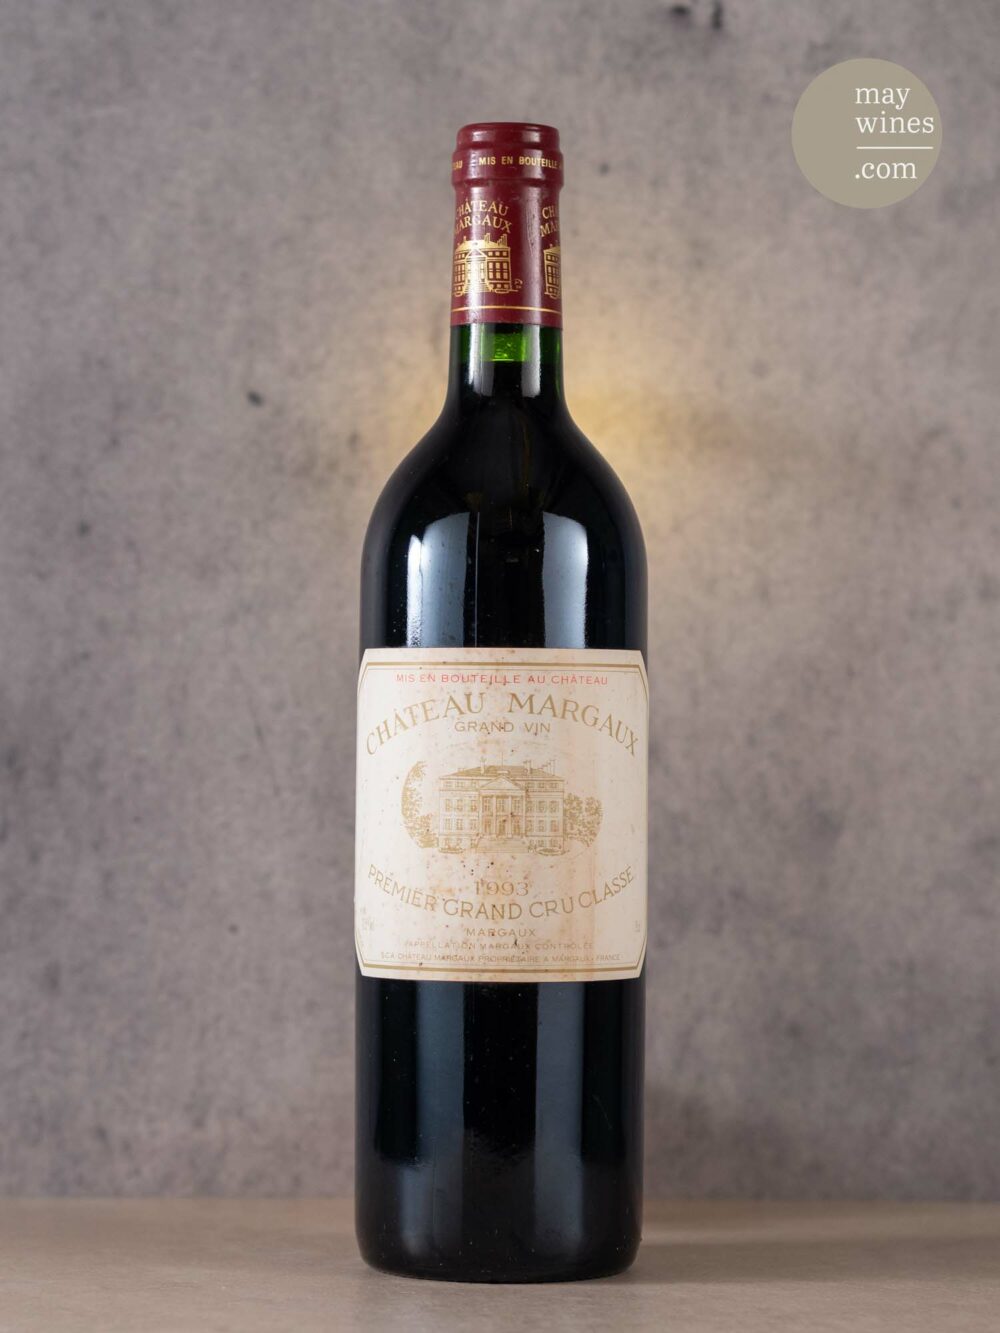 May Wines – Rotwein – 1993 Château Margaux